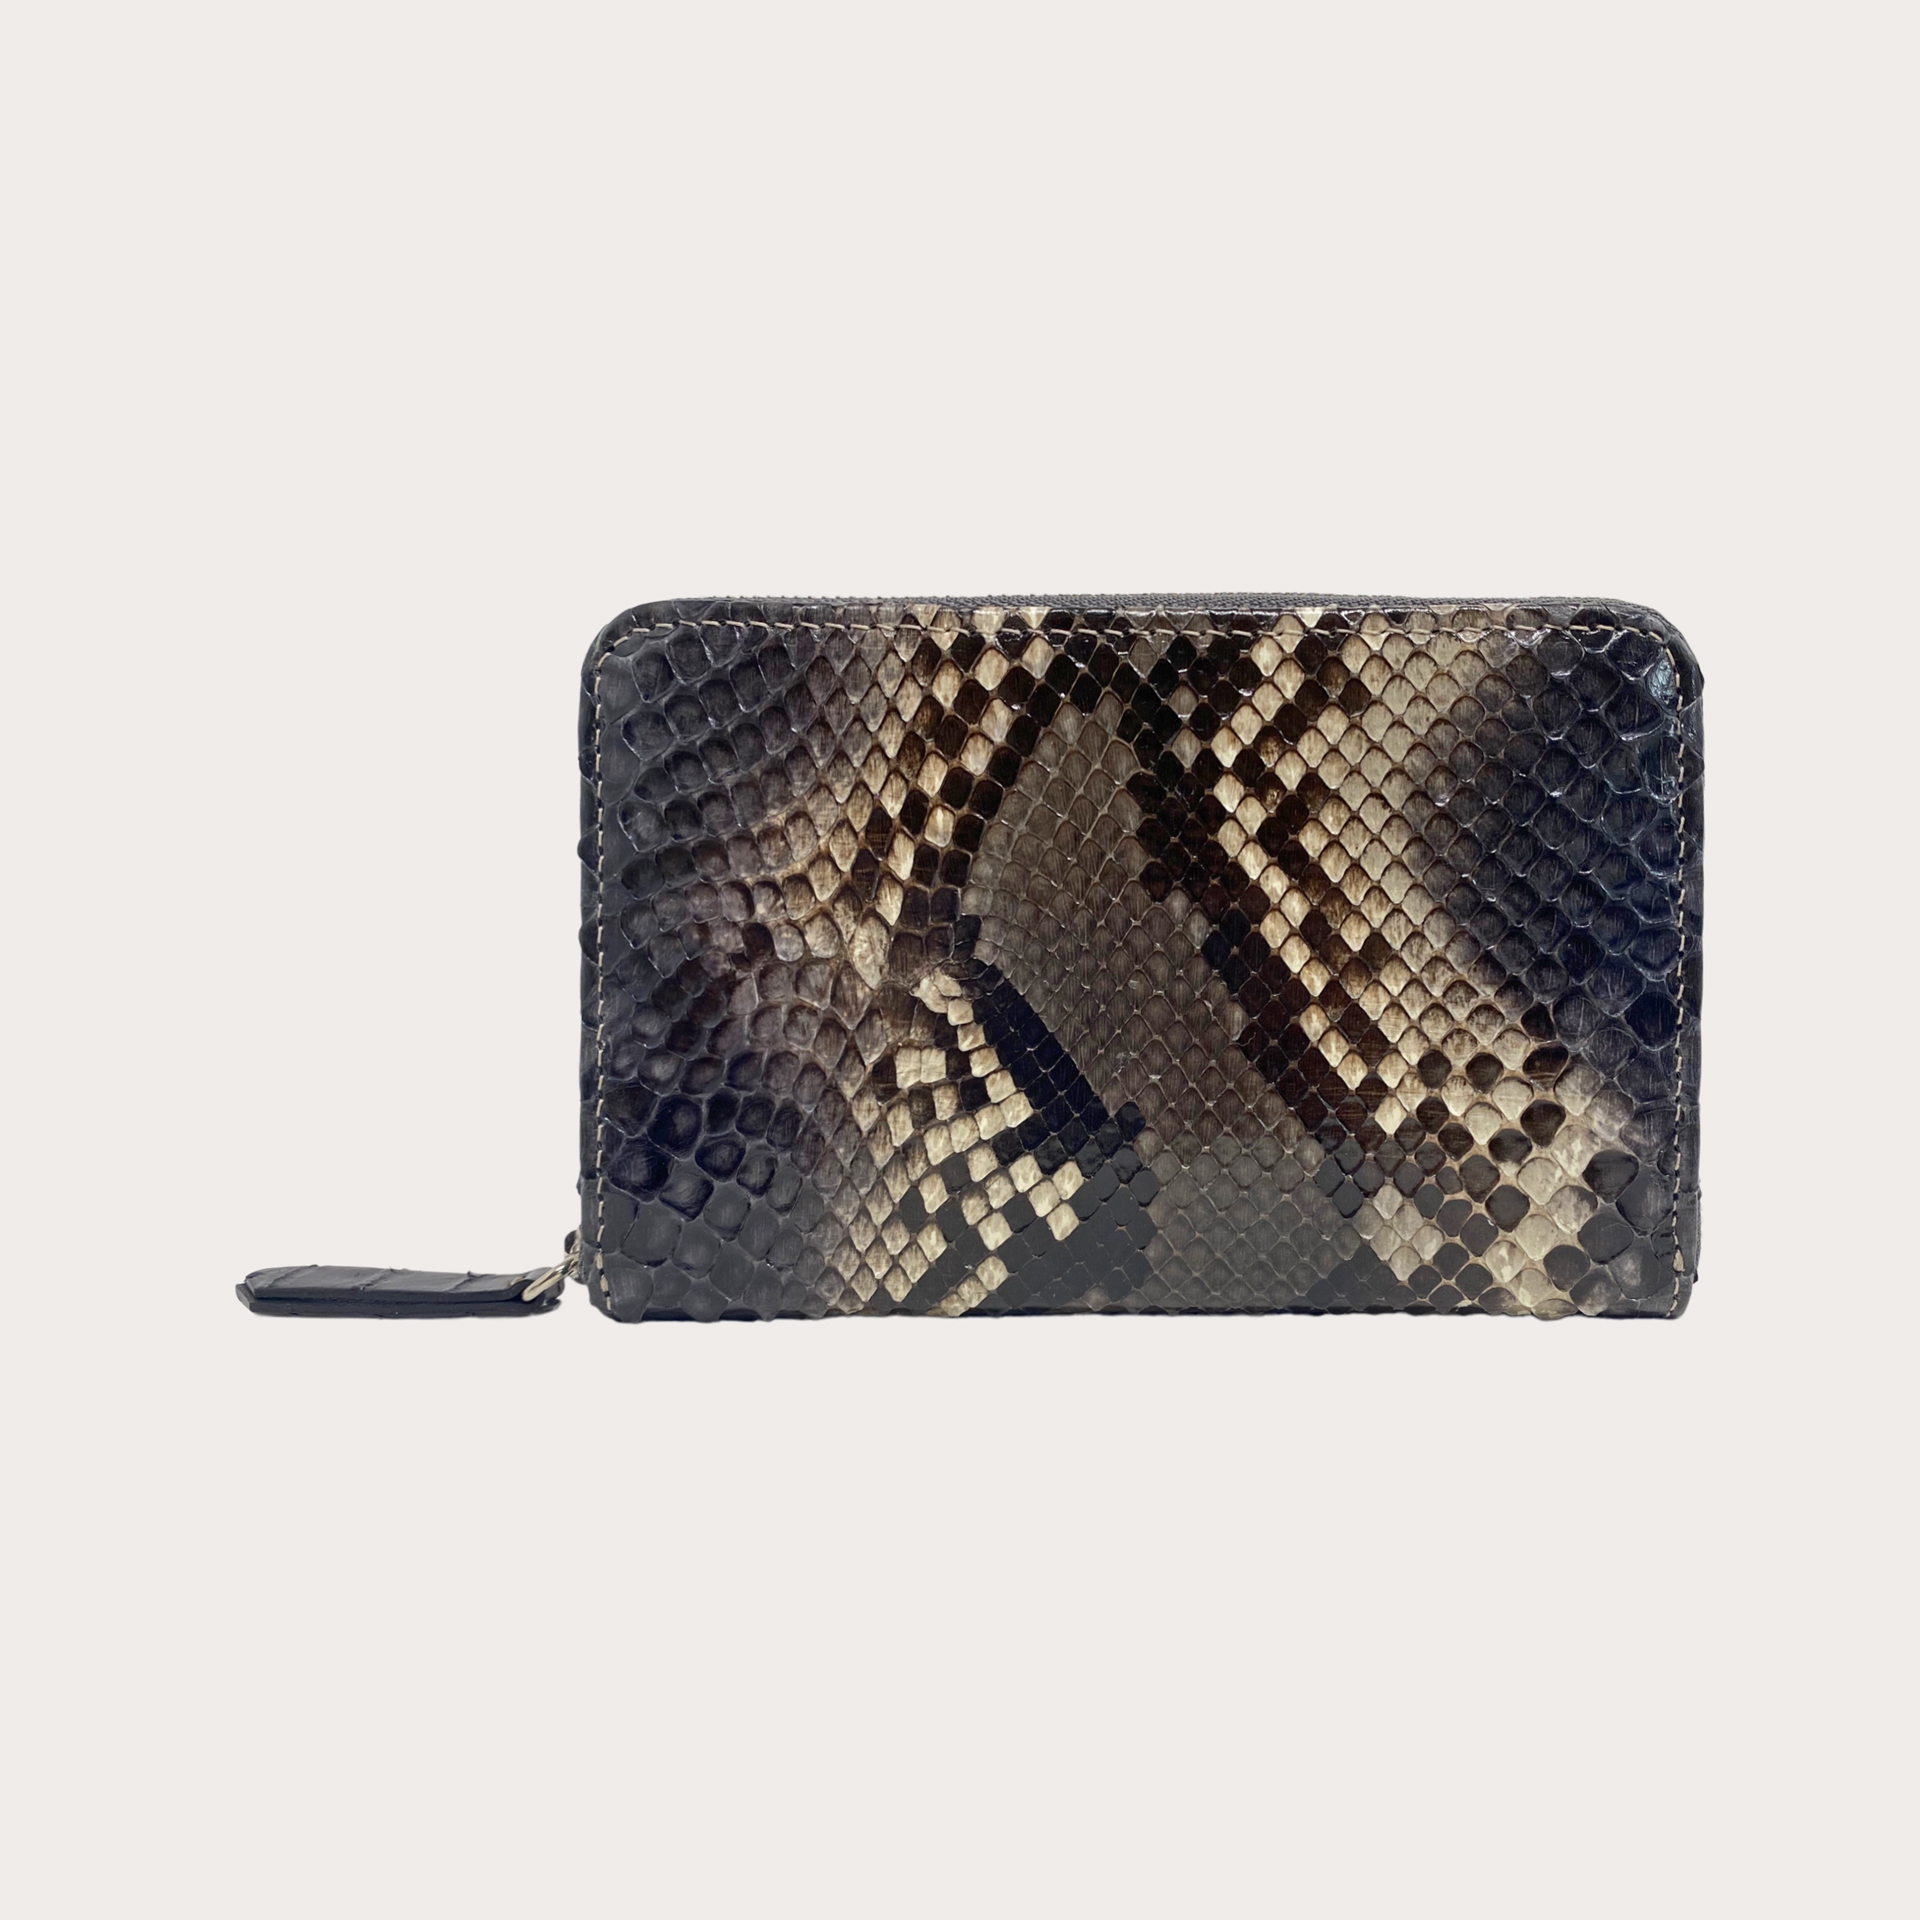 BRUCLE Women's compact wallet in python, shades of grey, shiny